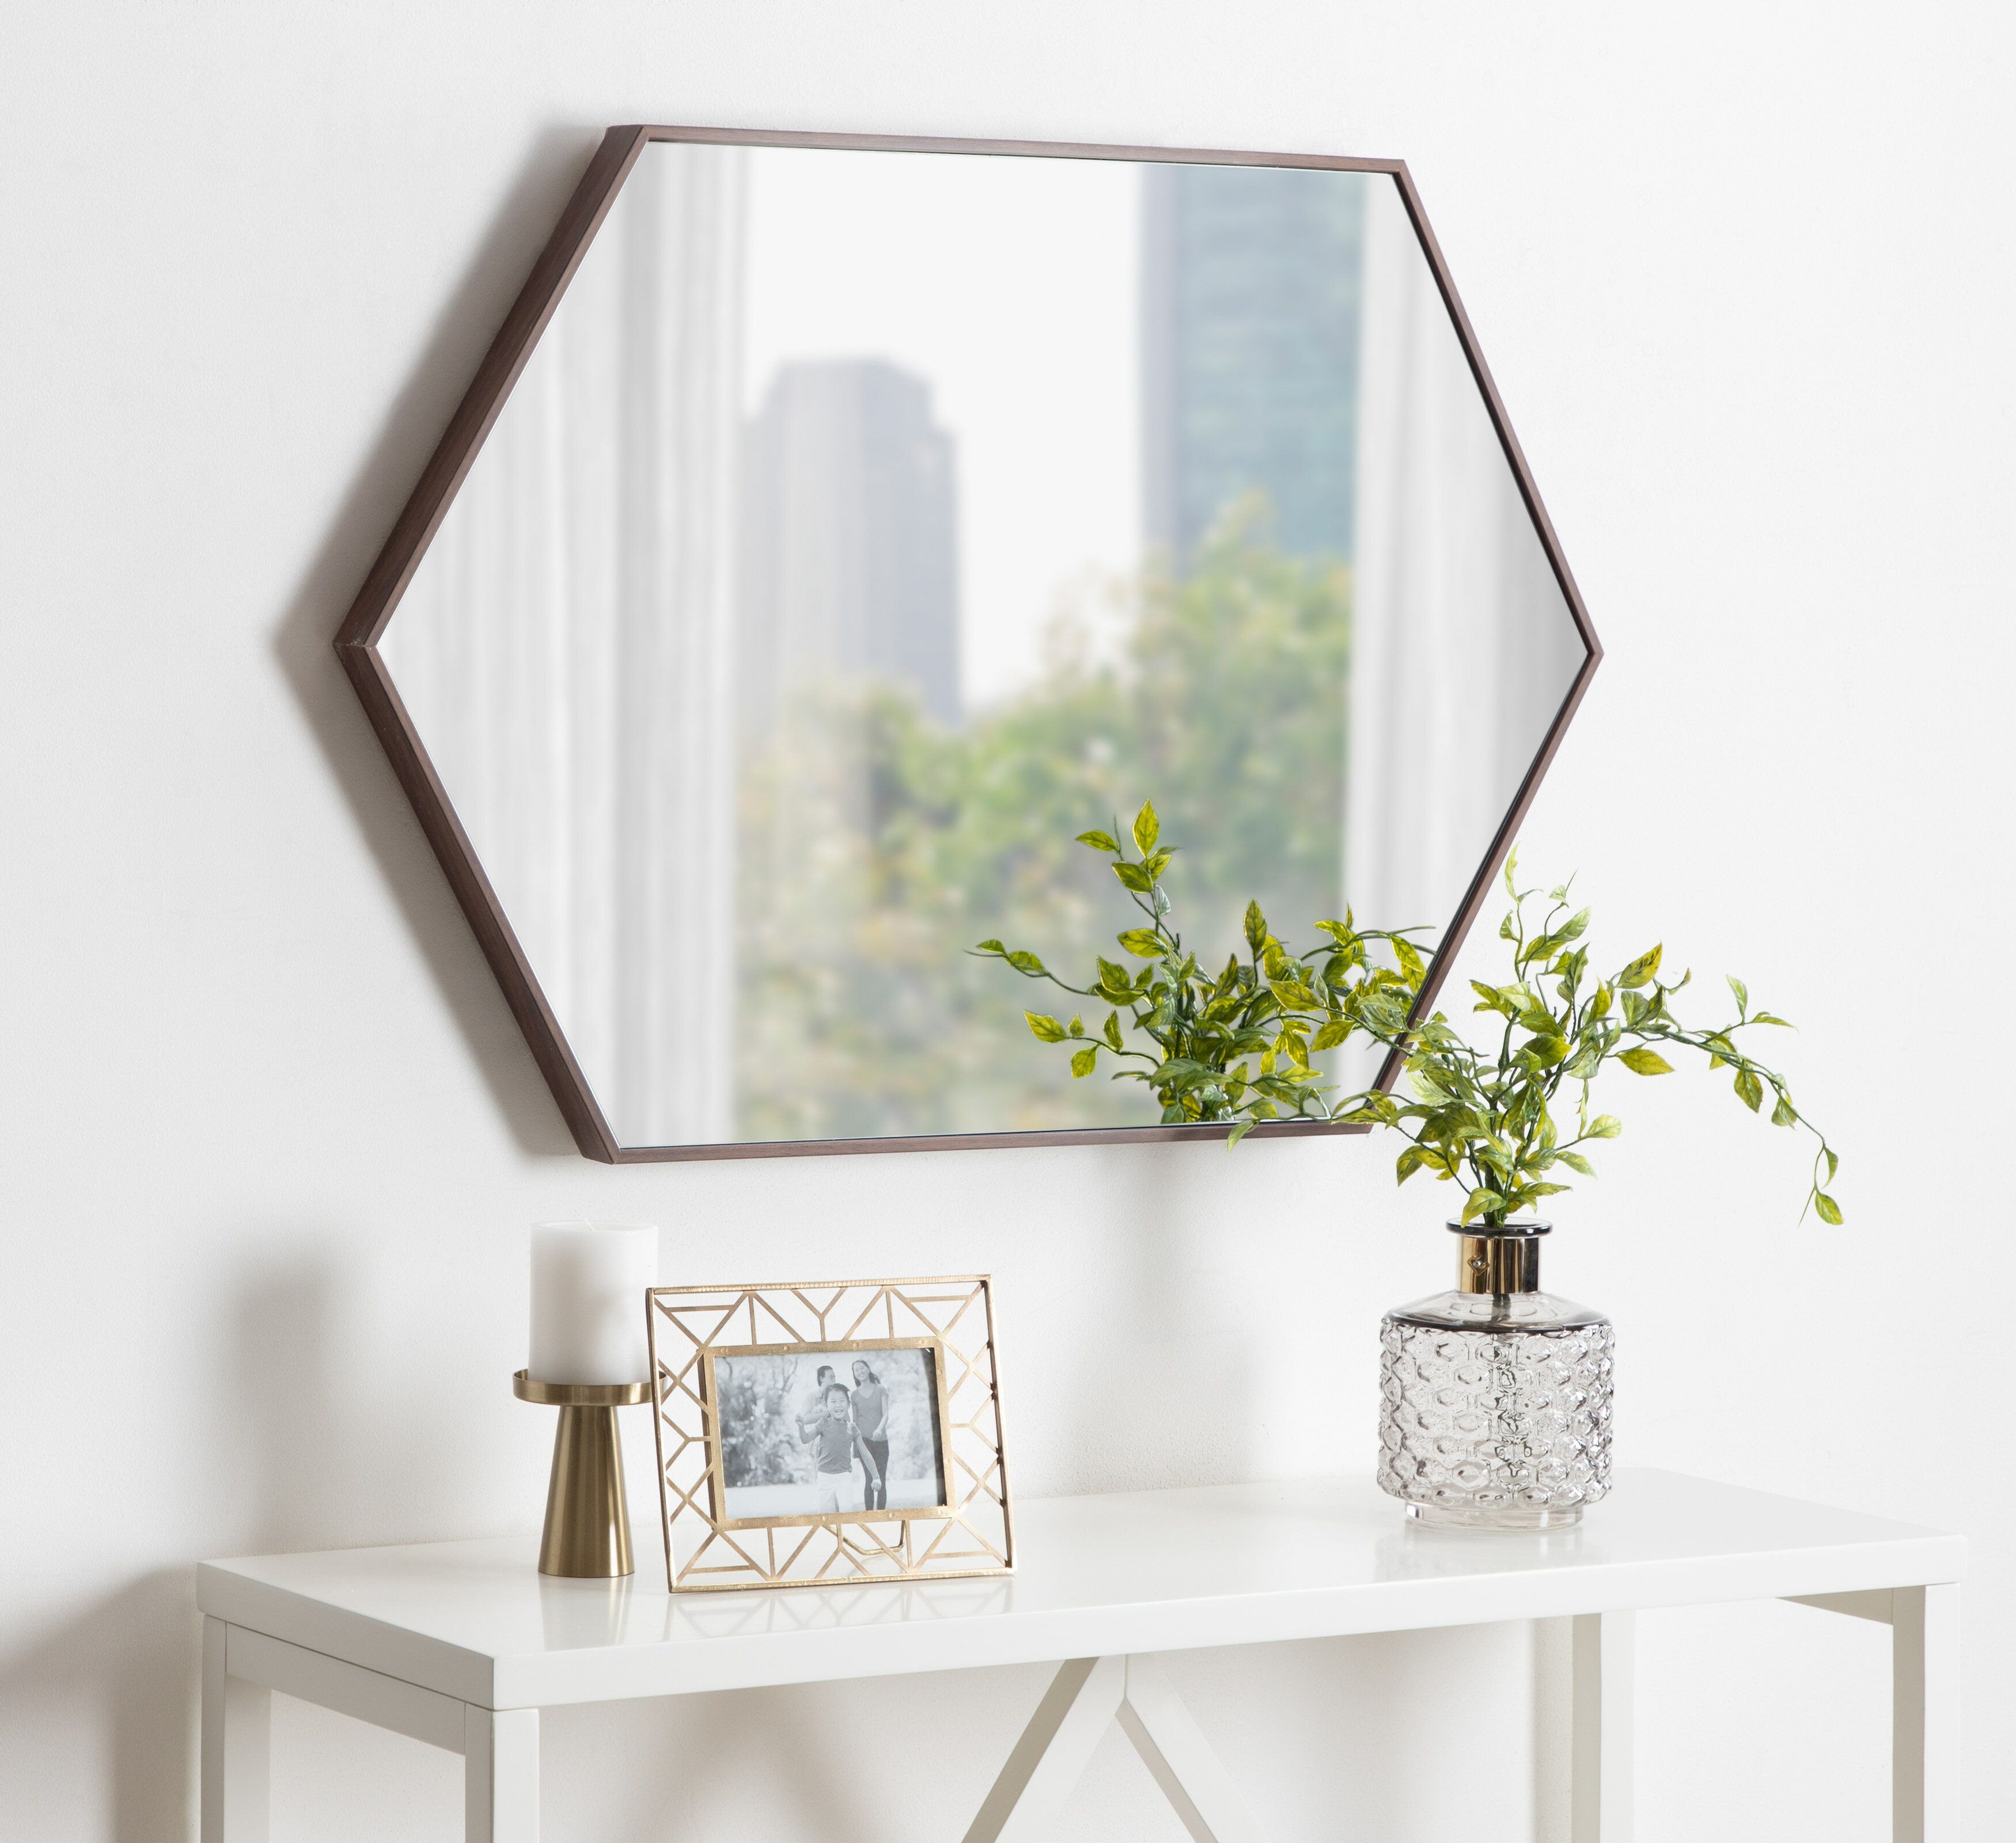 Zaliki Mid Century Hexagon Accent Mirror With Wood Accent Mirrors (View 12 of 20)